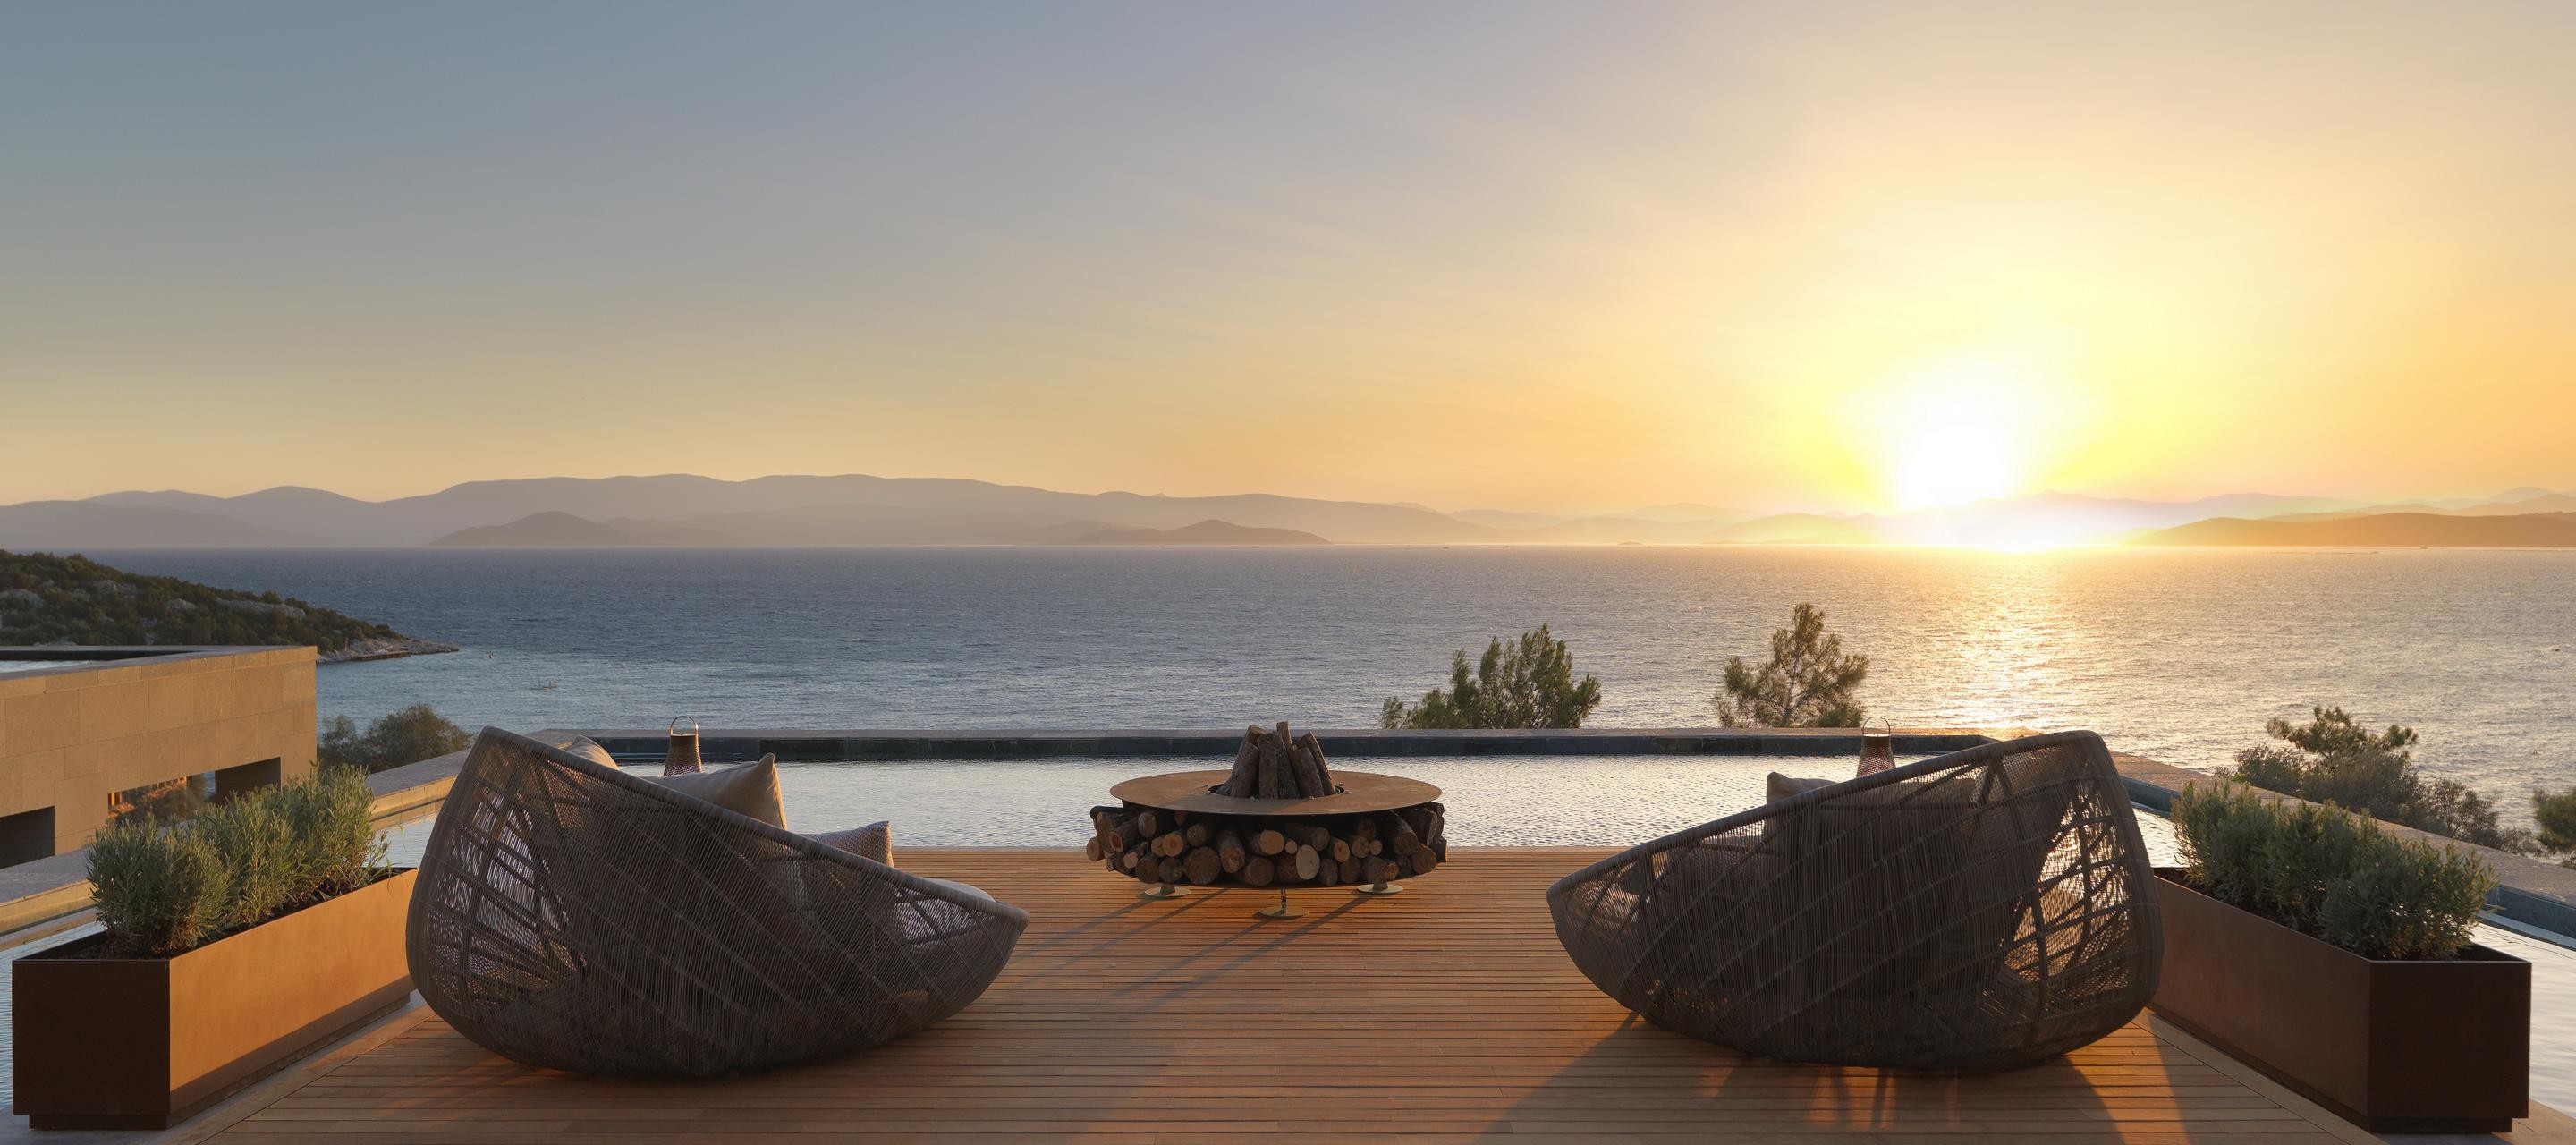 news-main-mandarin-oriental-bodrum-re-opens-for-the-season-in-april-with-expanded-offering.1553532848.jpg